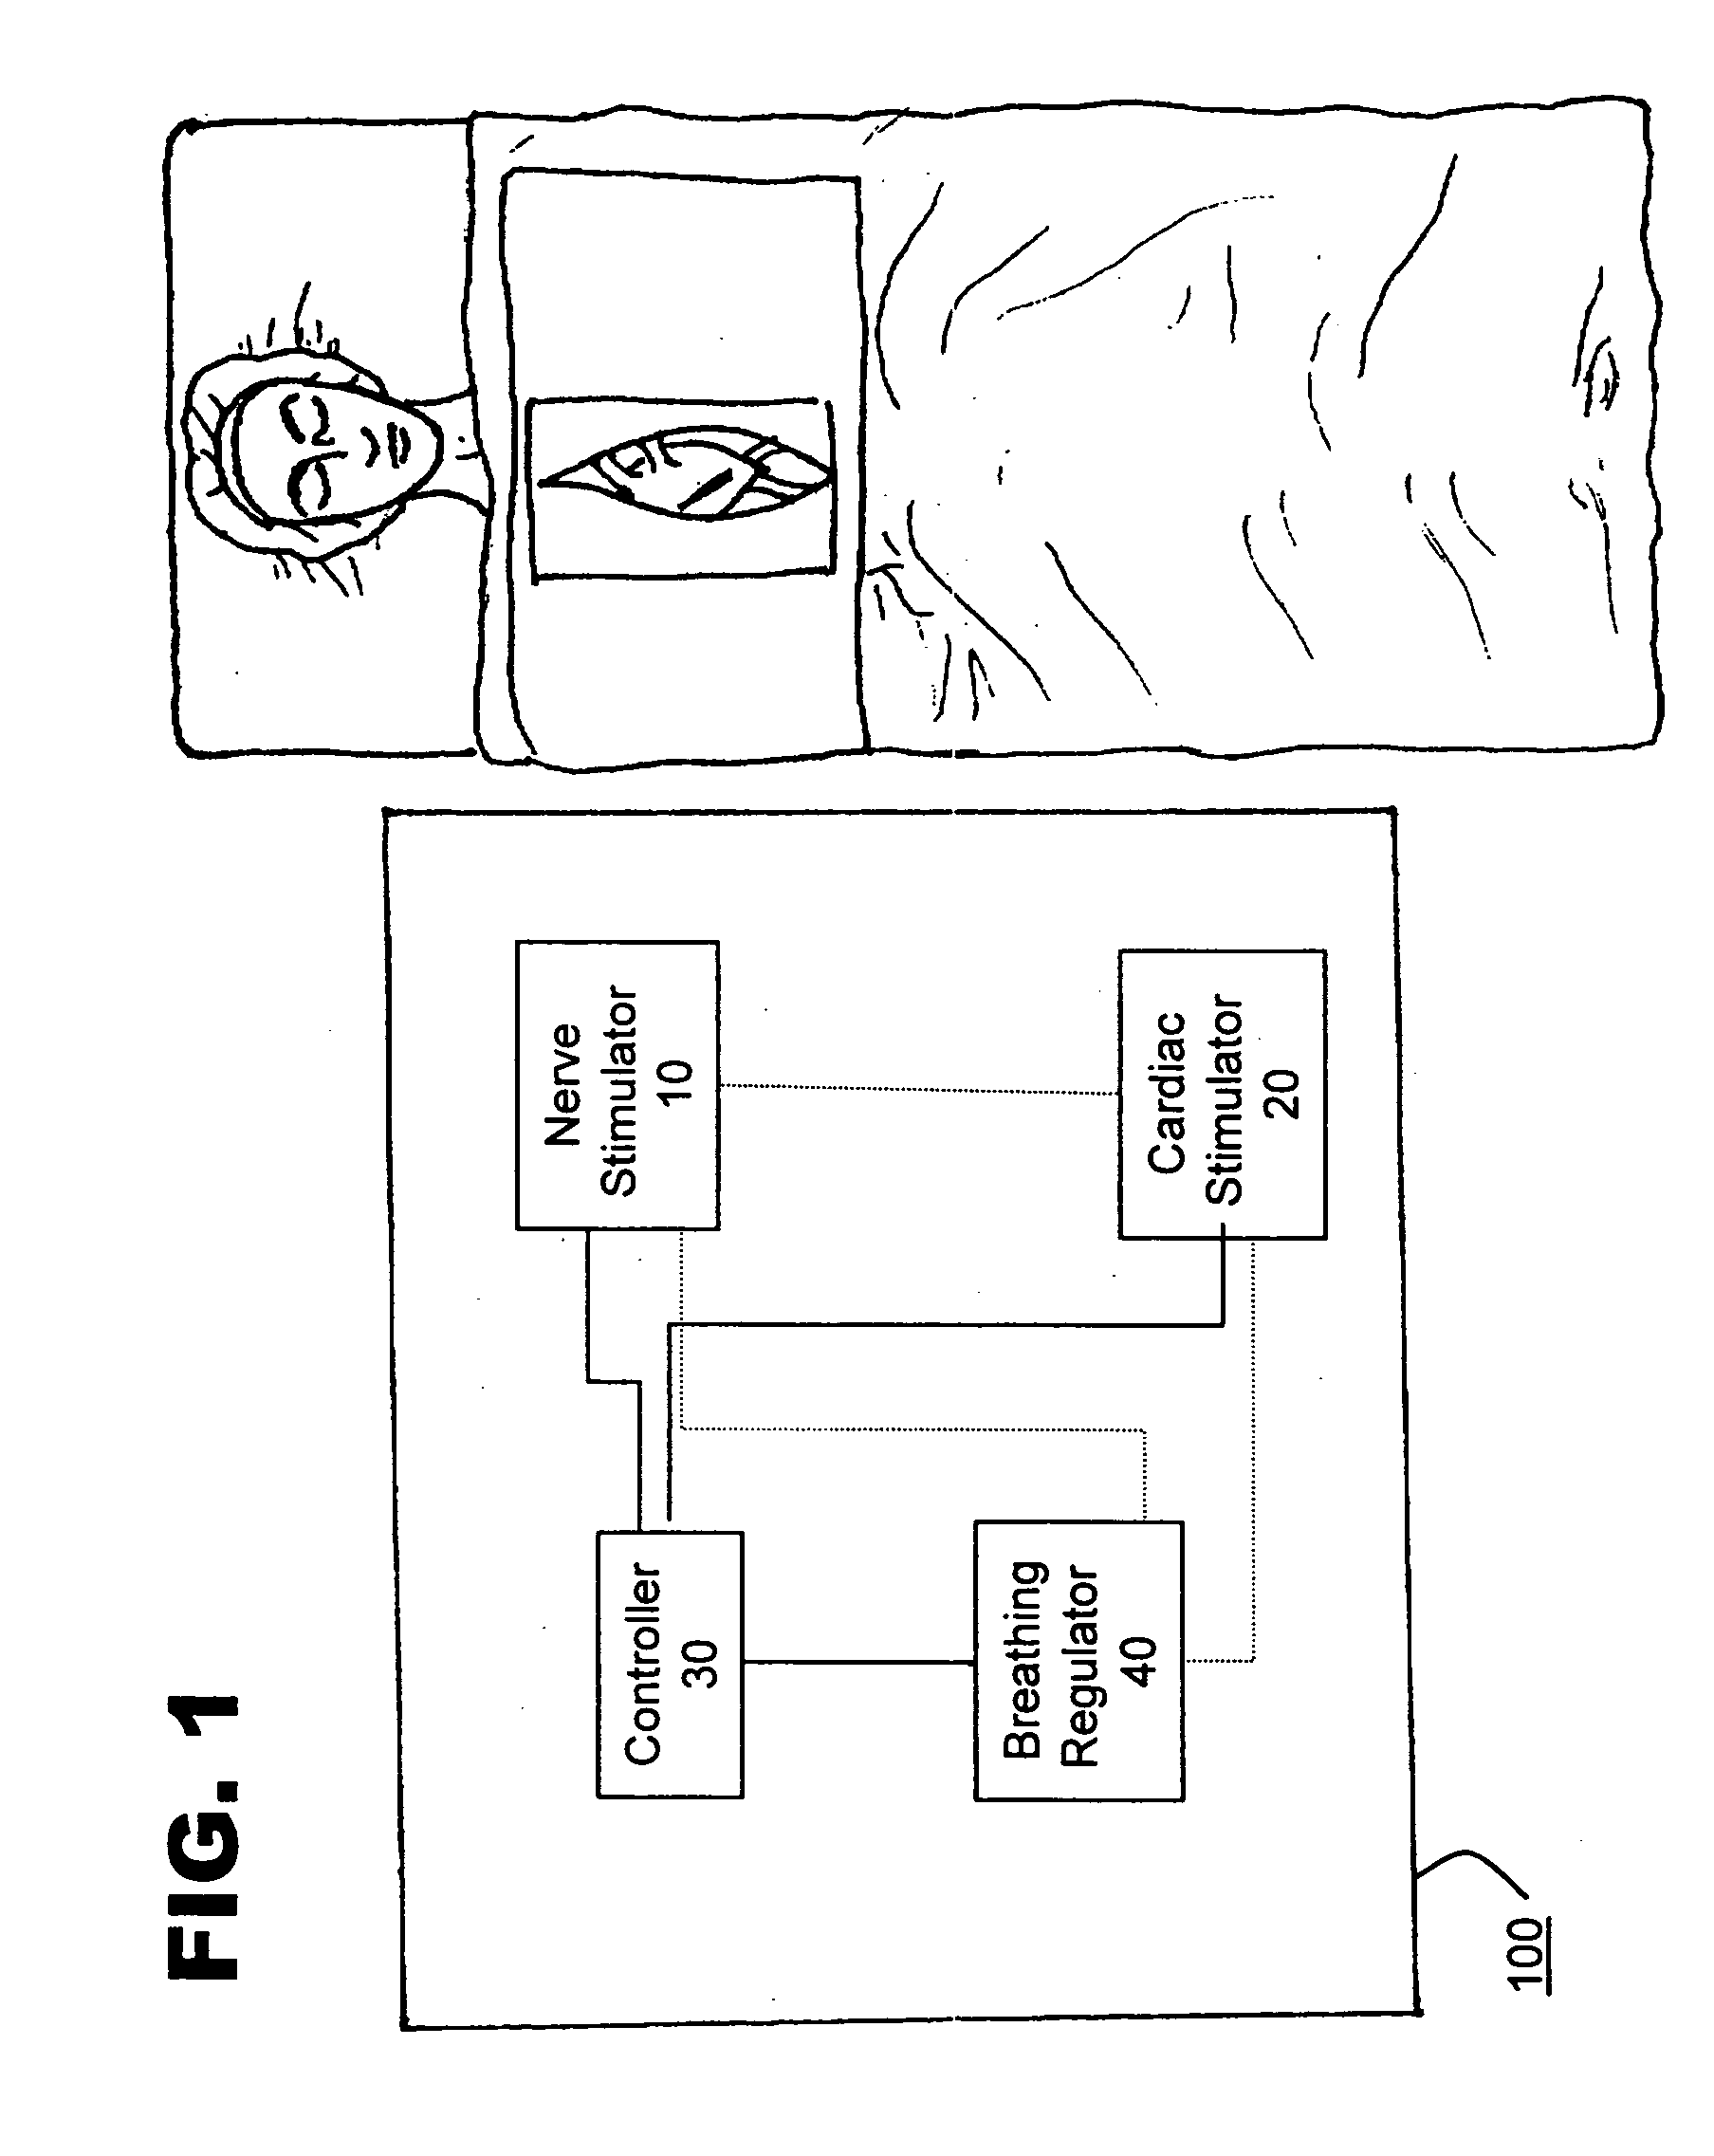 Method and system for nerve stimulation prior to and during a medical procedure